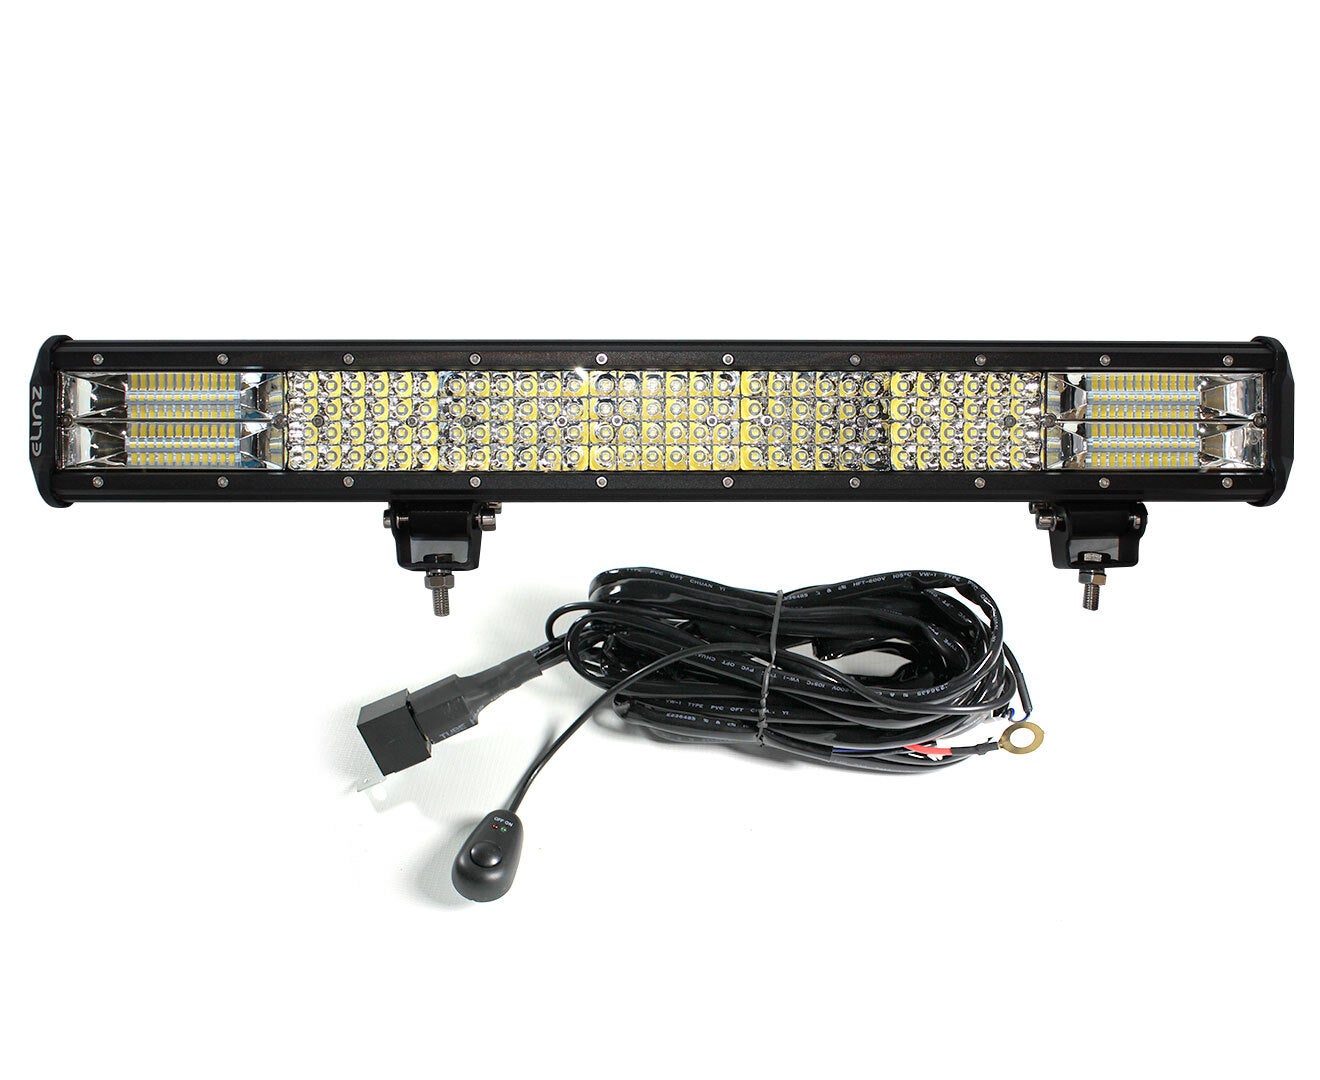 Elinz 23" LED Light Bar 4 Rows Philips Work Driving FLOOD SPOT COMBO IP68 Offroad 4WD